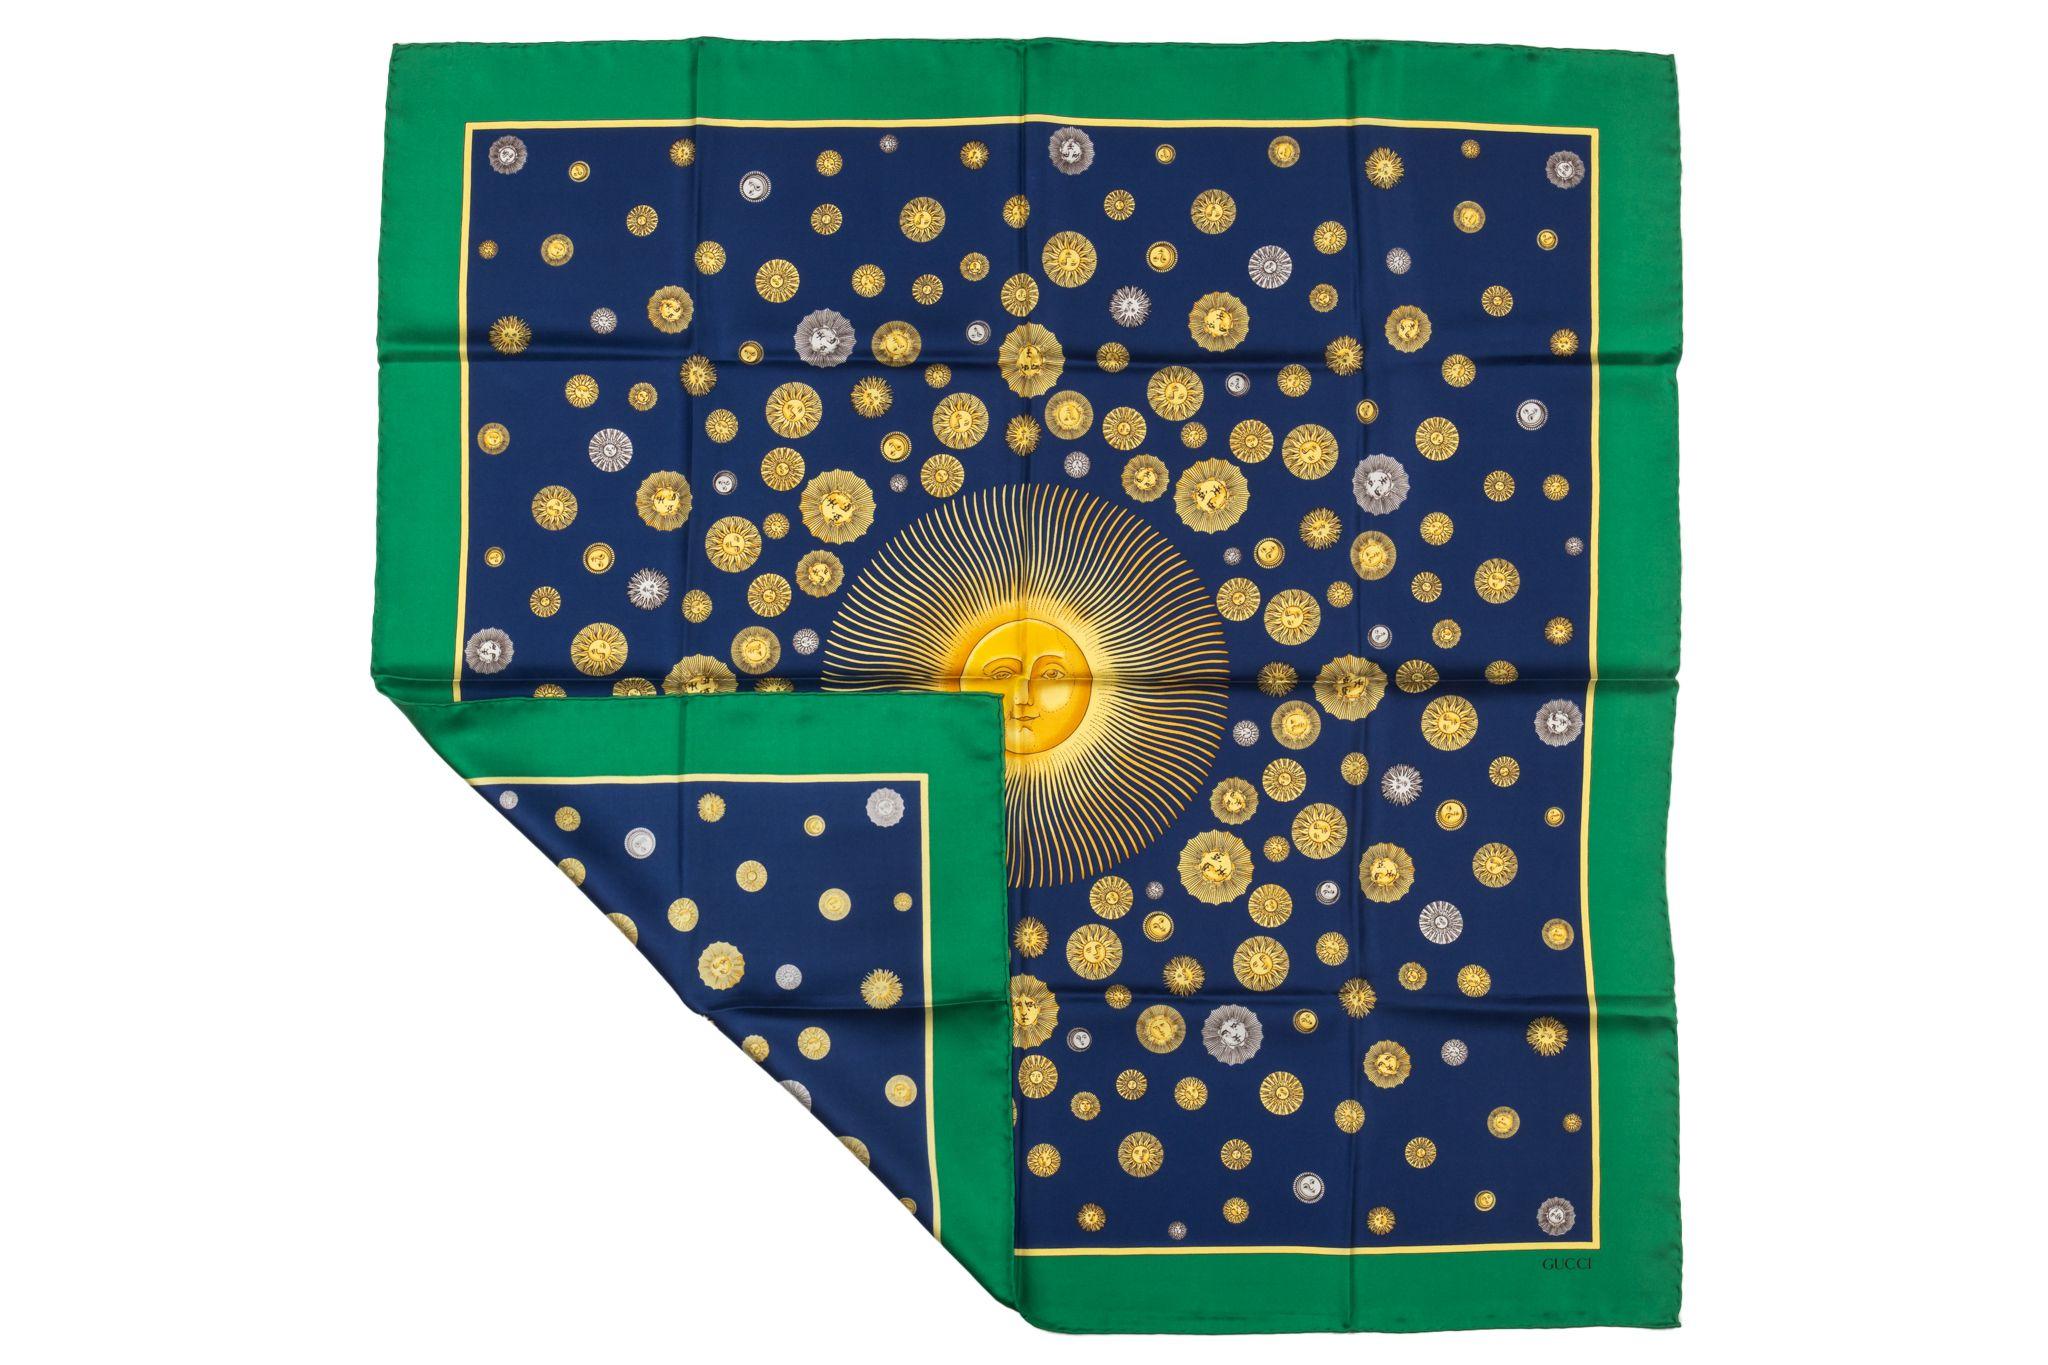 Gucci silk scarf in blue with a green frame. The pattern shows several suns. The item is in excellent condition.